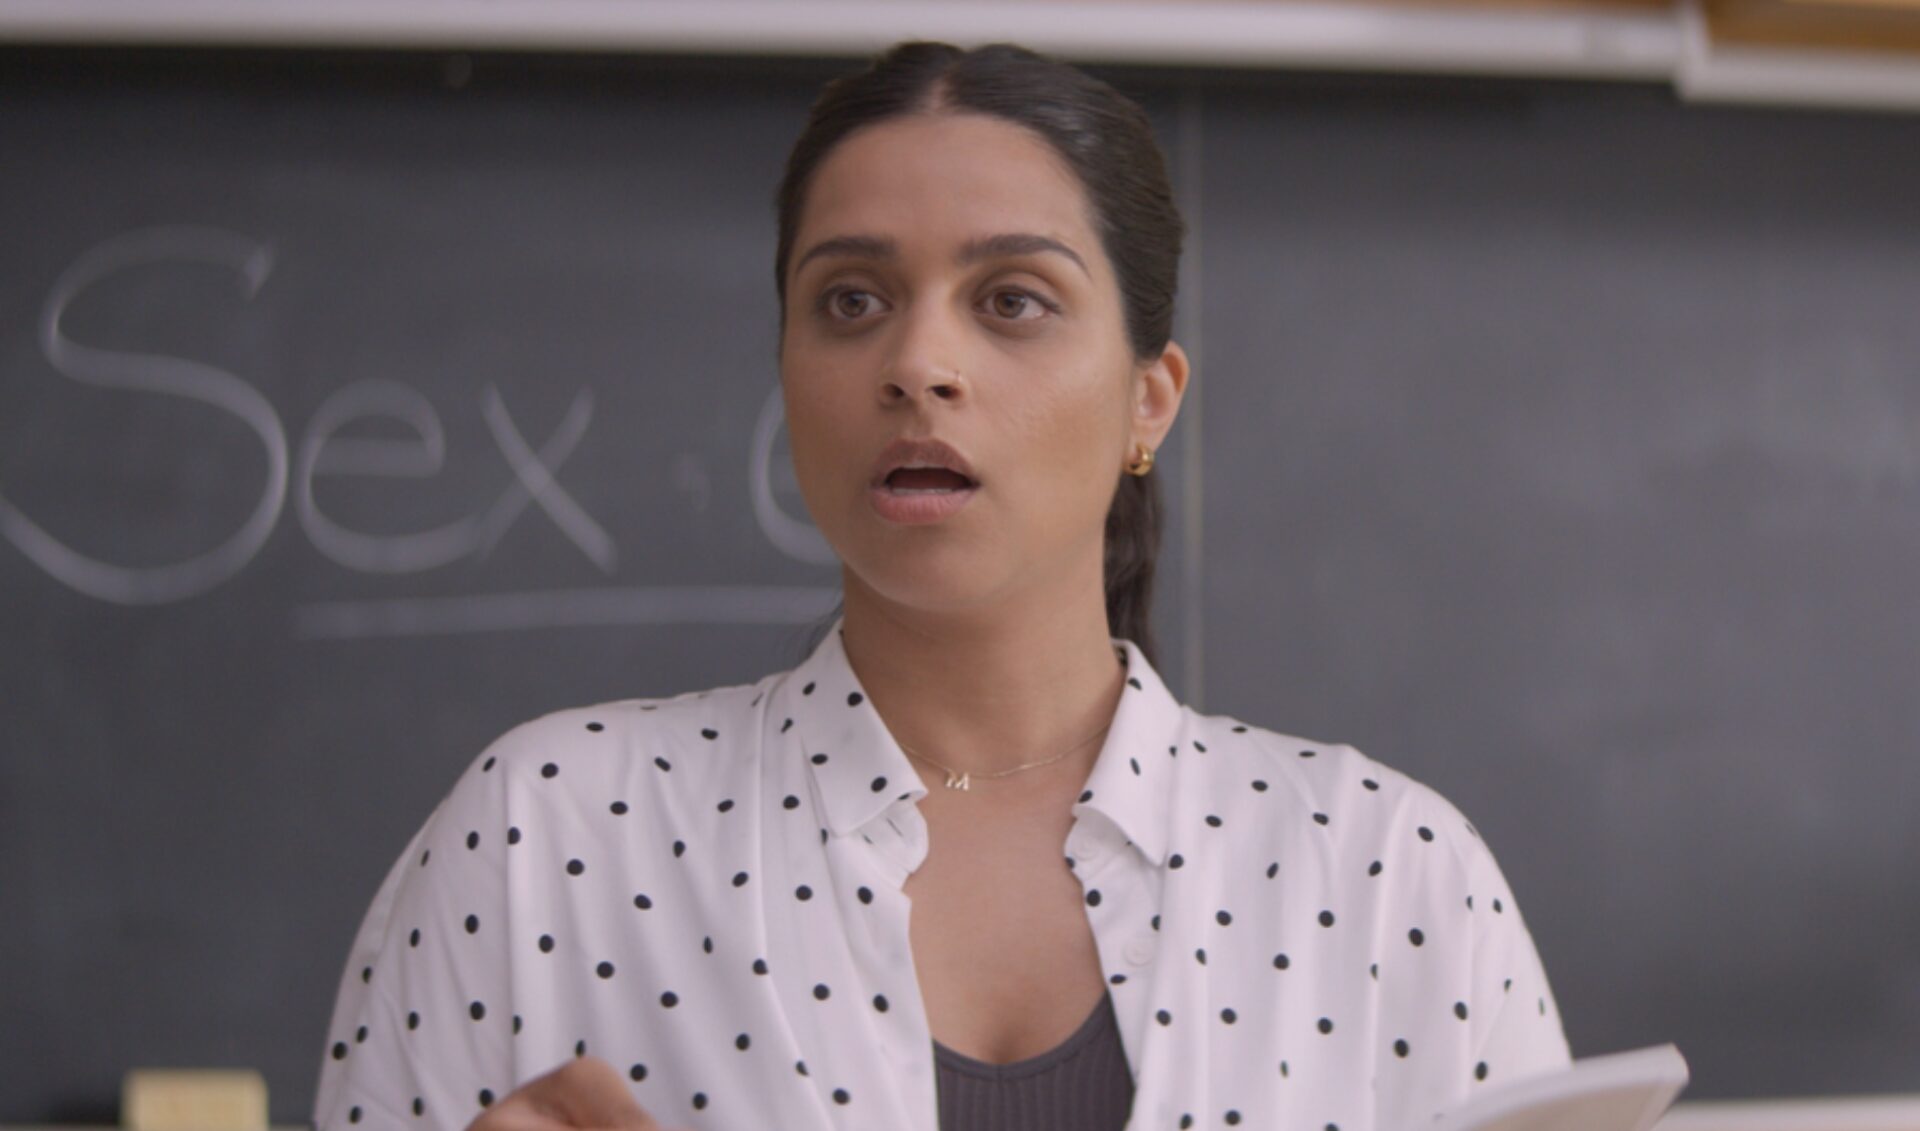 Lilly Singh is ‘Doin’ It’ with SXSW premiere for her debut feature film